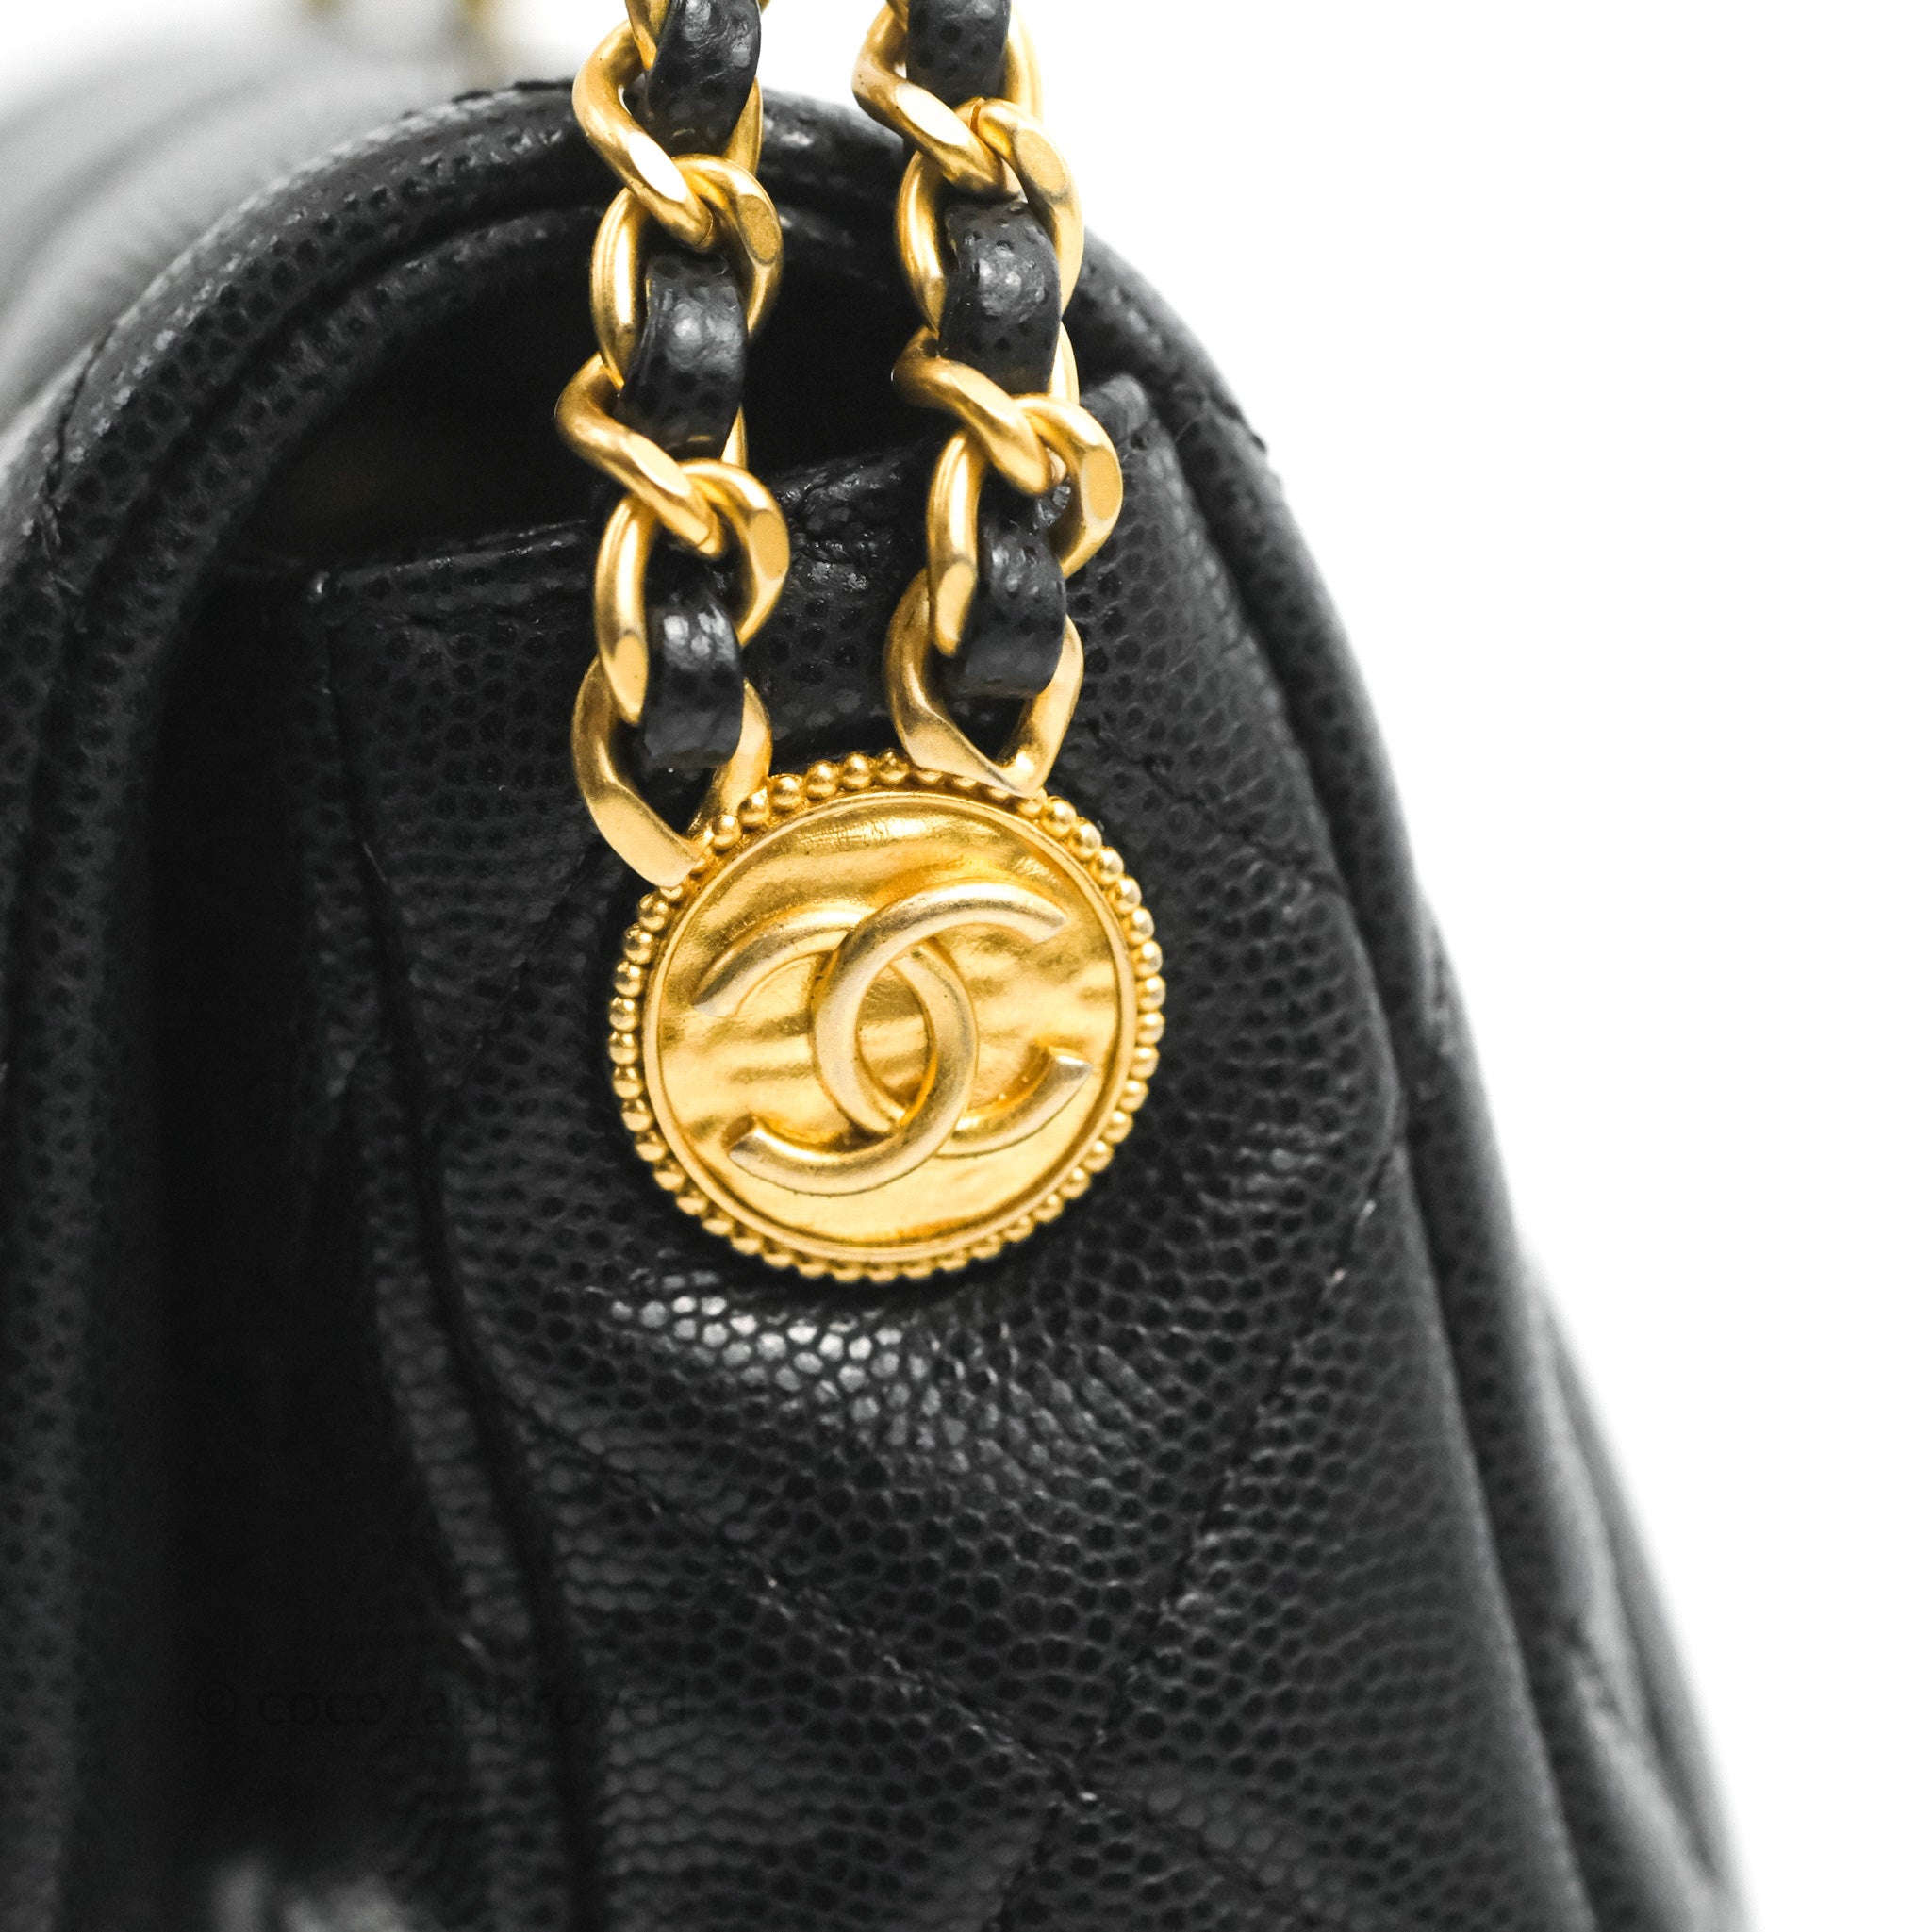 Chanel Mini Flap with Coin Charm Black Caviar Aged Gold Hardware 22A – Coco  Approved Studio